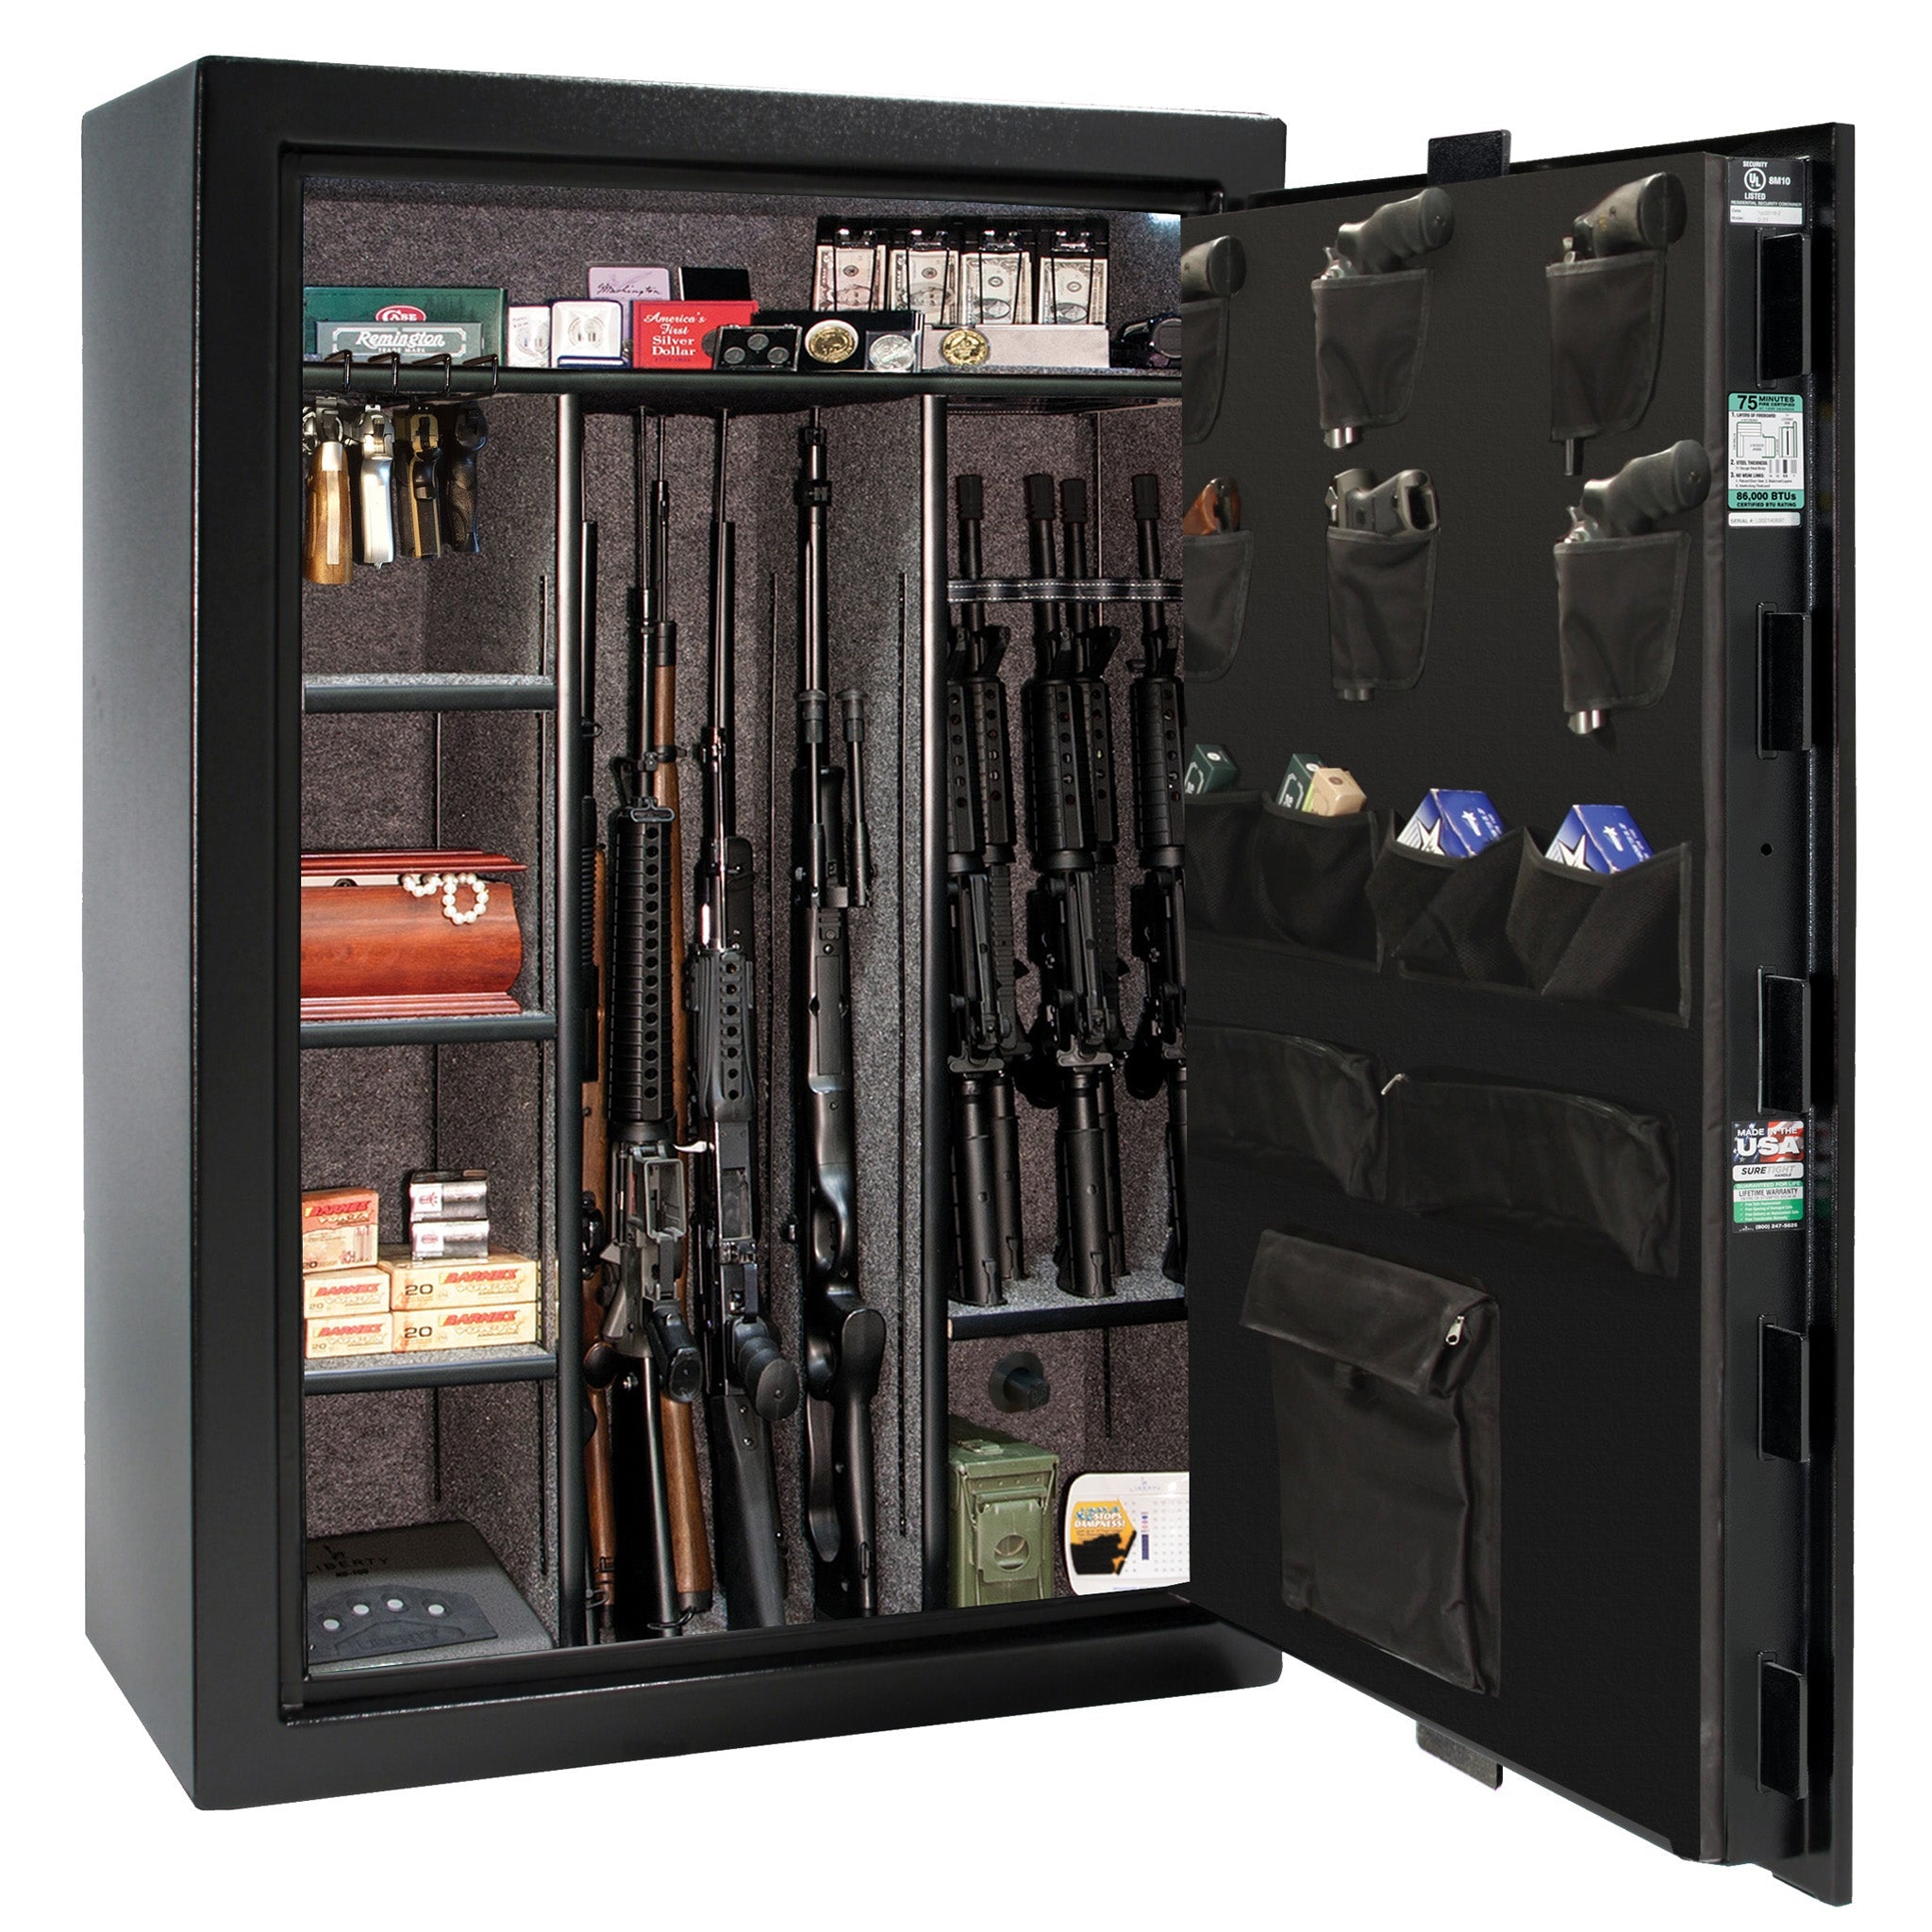 Fatboy Jr. Series | 48XT | Level 4 Security | 75 Minute Fire Protection | Dimensions: 60.5"(H) x 42"(W) x 22"(D) | Up to 48 Long Guns | Black Textured | Mechanical Lock